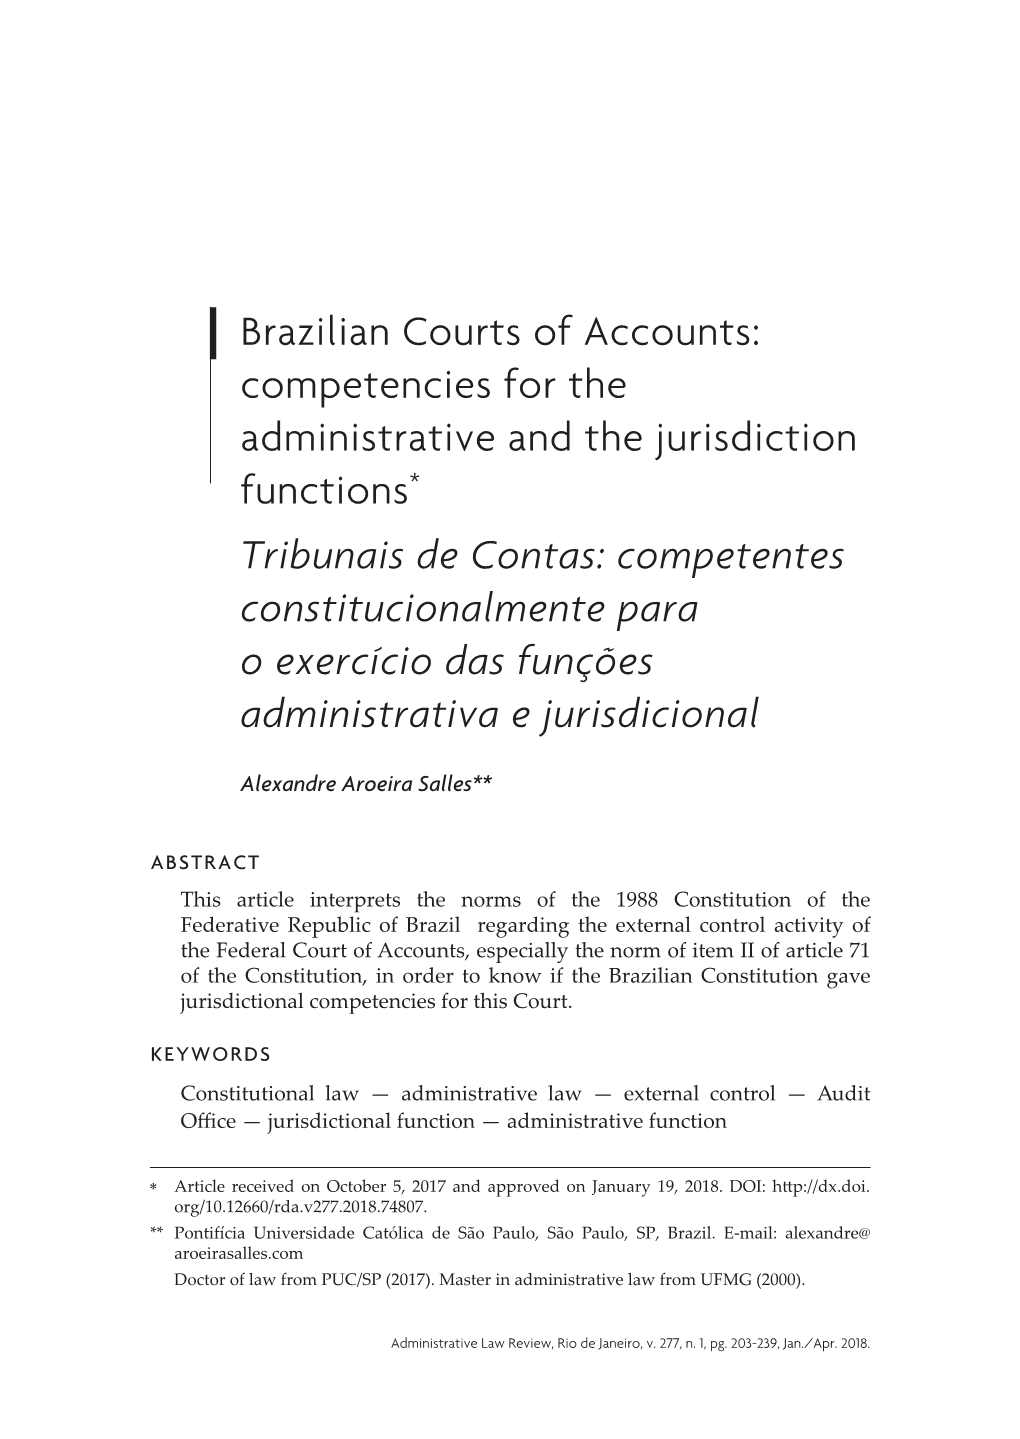 Brazilian Courts of Accounts: Competencies for the Administrative